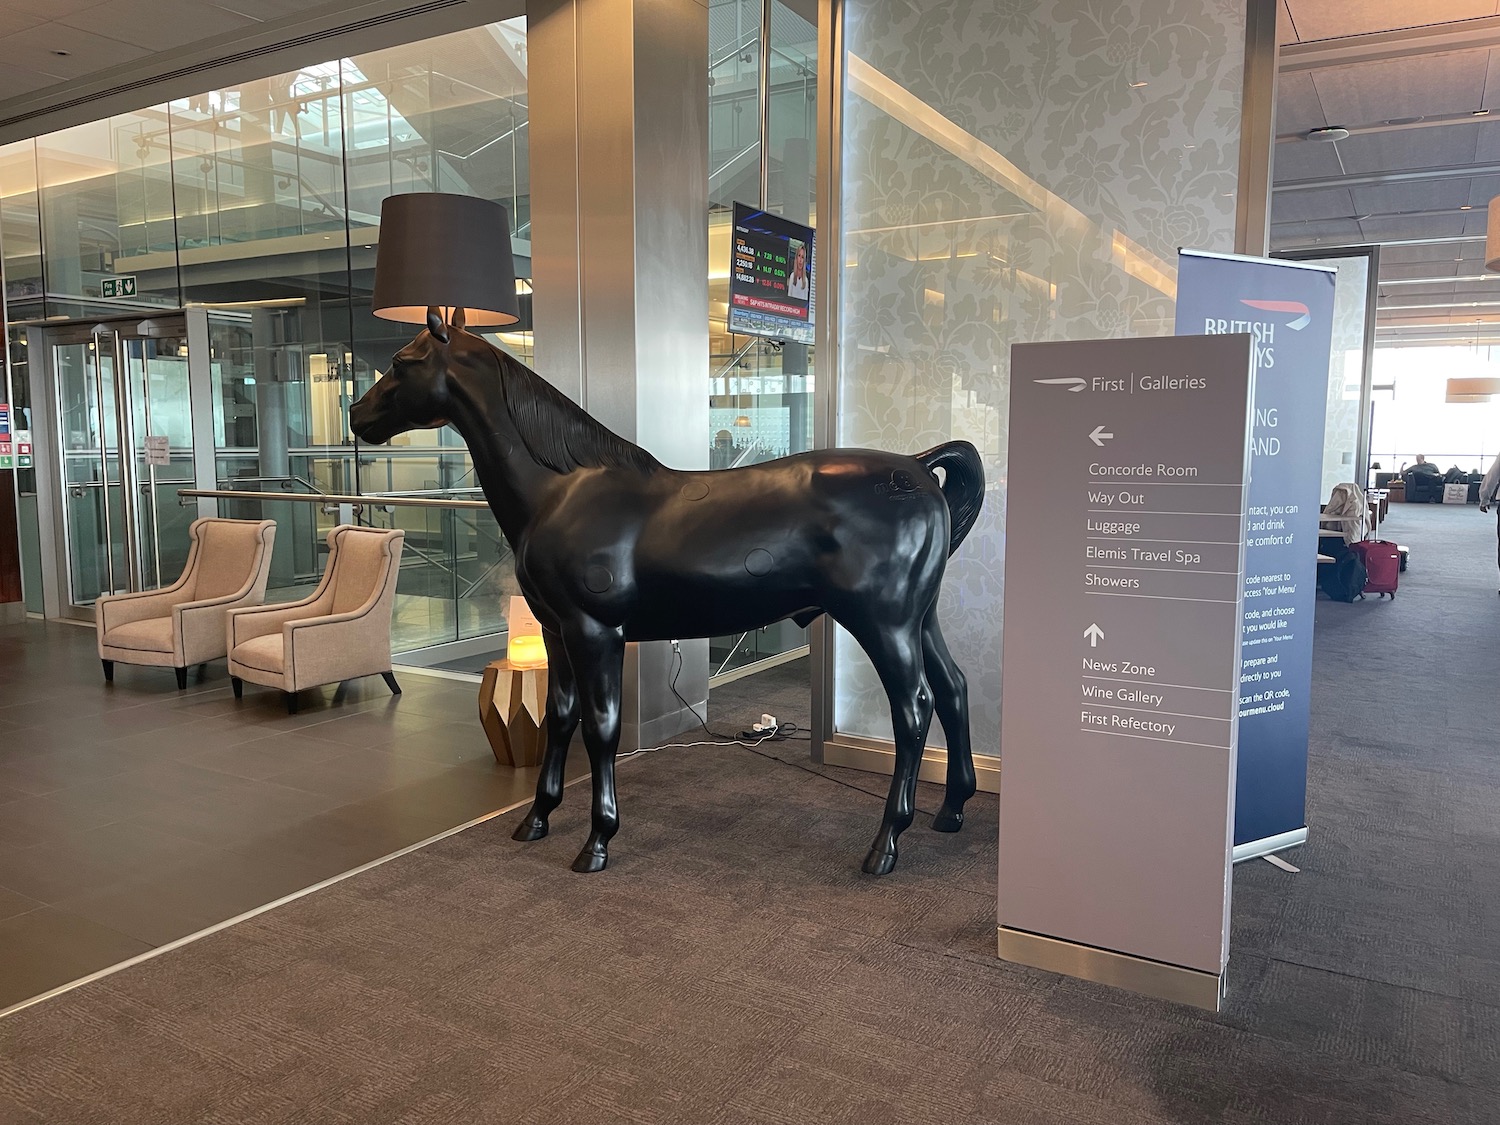 a statue of a horse with a lamp shade